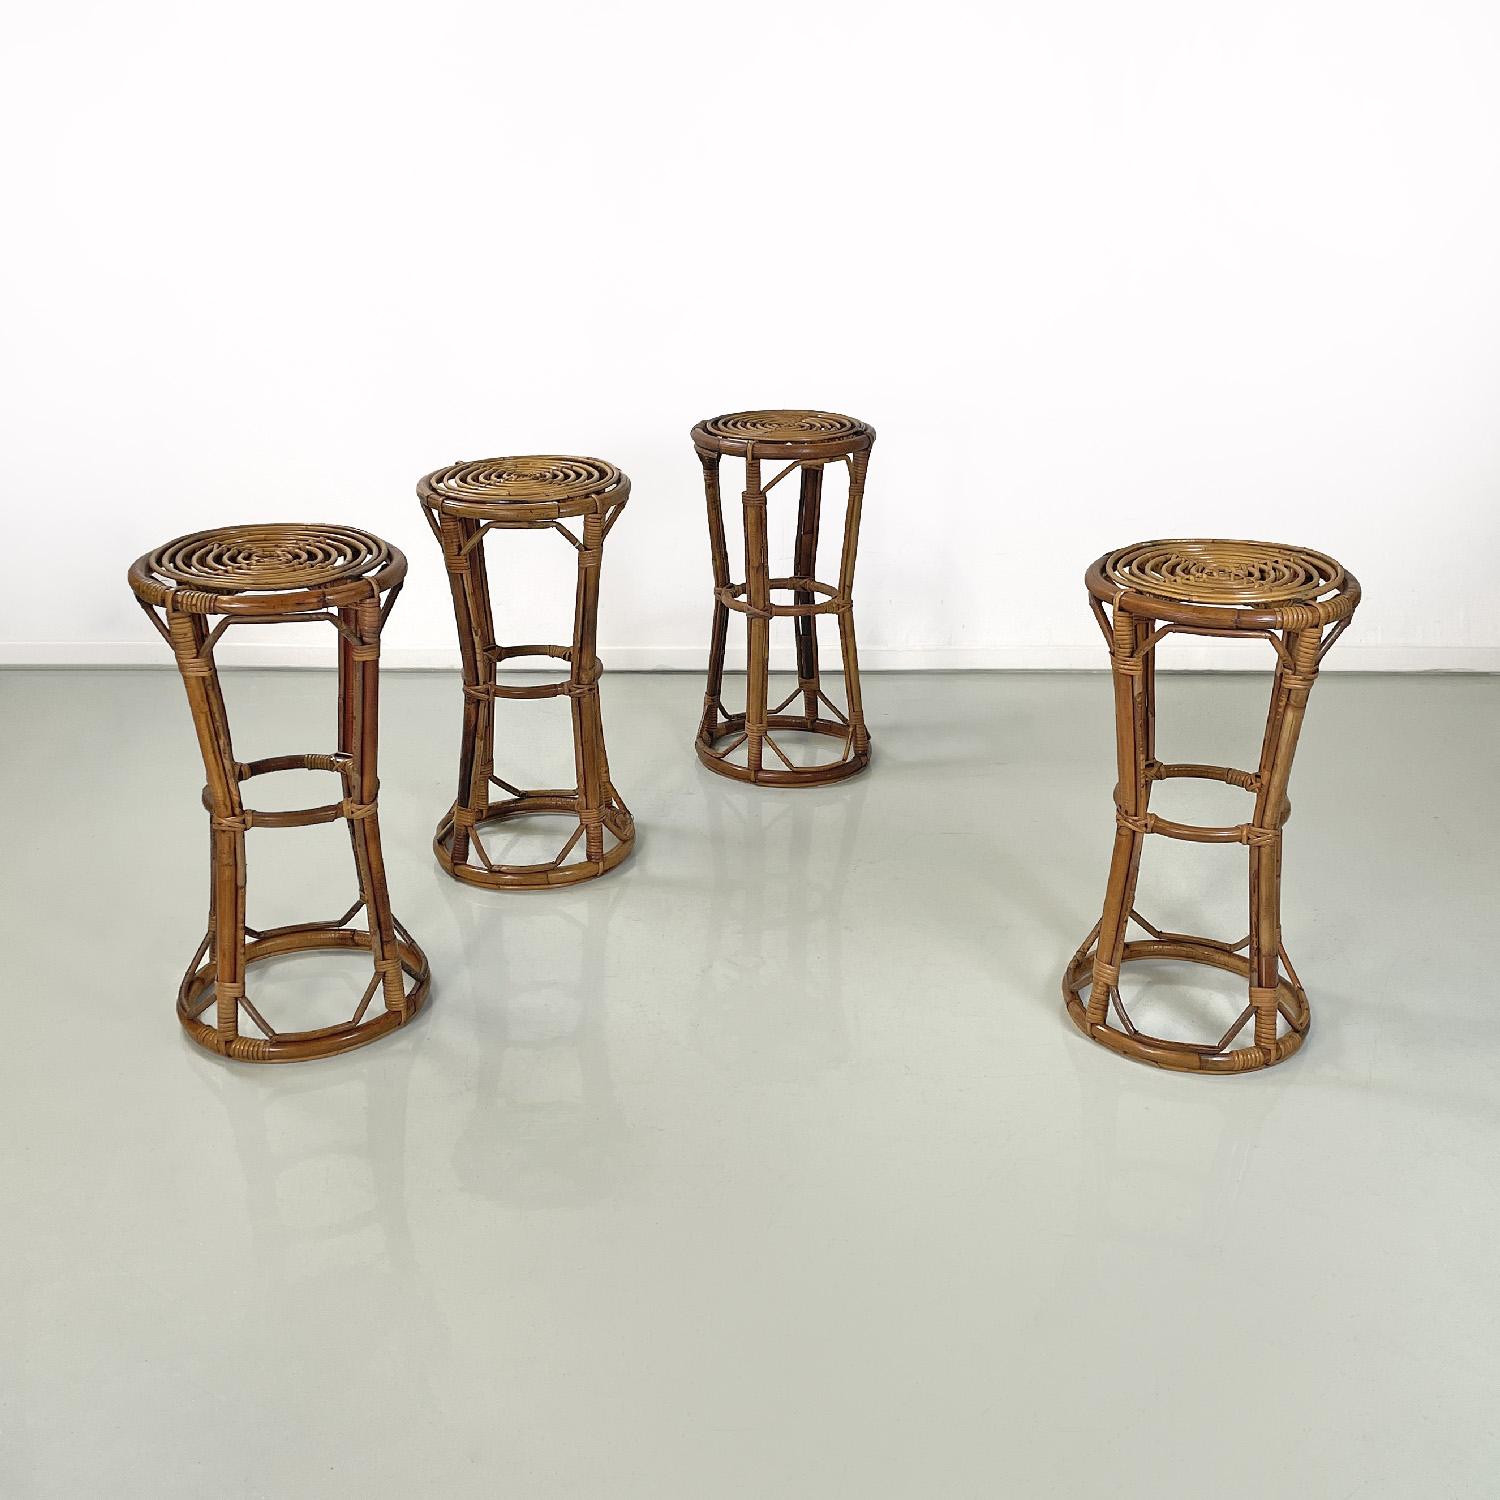 Italian mid-century modern round rattan high bar stools, 1960s
Set of four high rattan bar stools with round base. The structure of the stools is given by three circles, the first is the seat which is composed of a spiral motif, then there is a